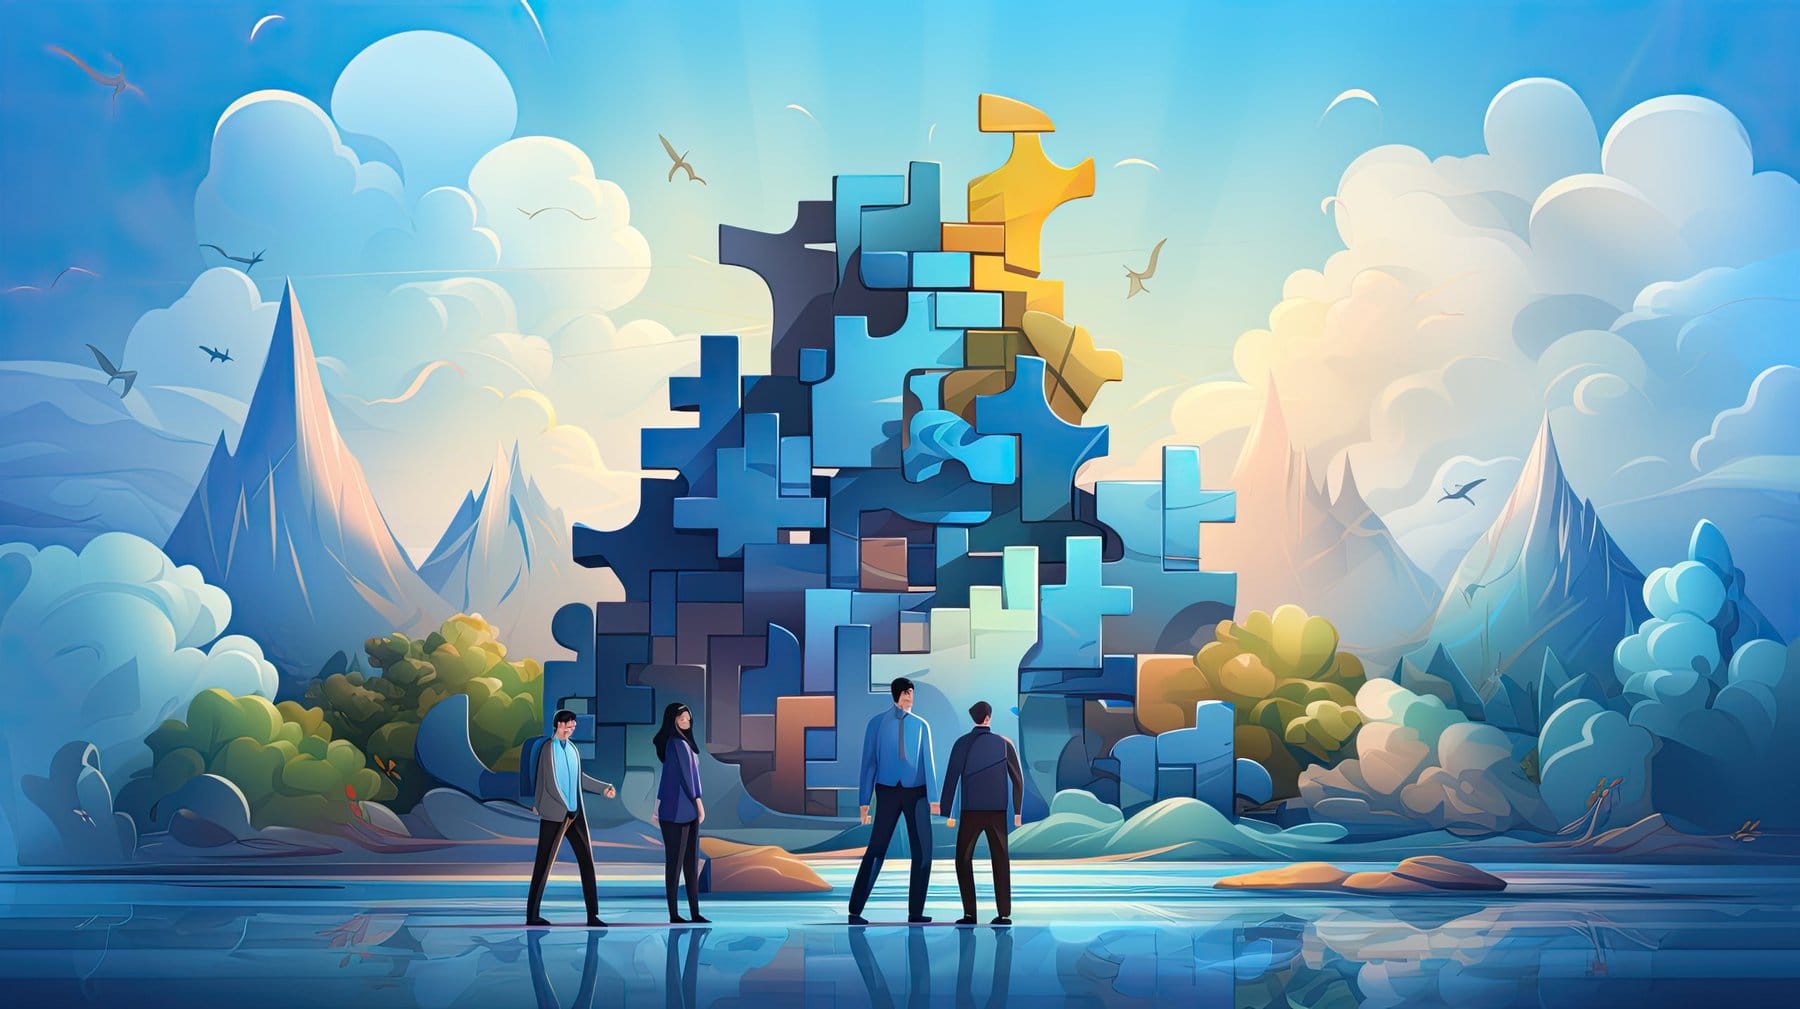 Business concept team metaphor people connecting puzzle landscape with clouds and sun